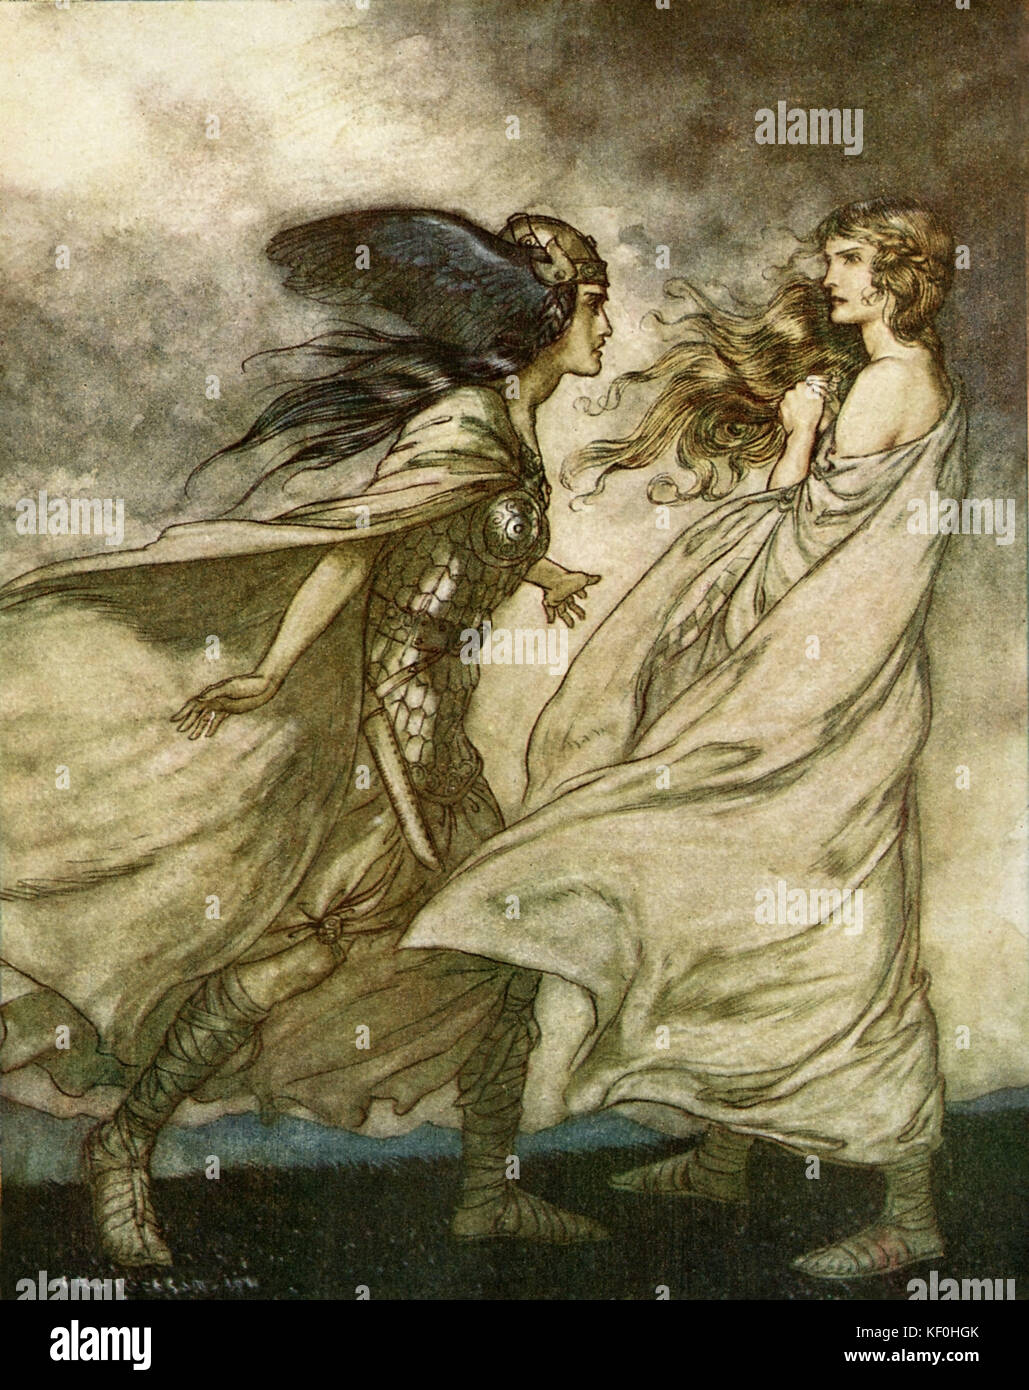 The Twilight of the Gods / Göttterdämmerung by Richard Wagner. Brünnhilde 's sister, Waltraute, urges her to return the Ring to the Rhine maidens.  Illustration by Arthur Rackham 1867 - 1939.  Caption:  'The ring upon thy hand - … ah, be implored! For Wotan fling it away!' Act 1.  From 'The Ring Cycle' / 'Der Ring des Nibelungen'.  RW German composer & author, 22 May 1813 - 13 February 1883. Stock Photo